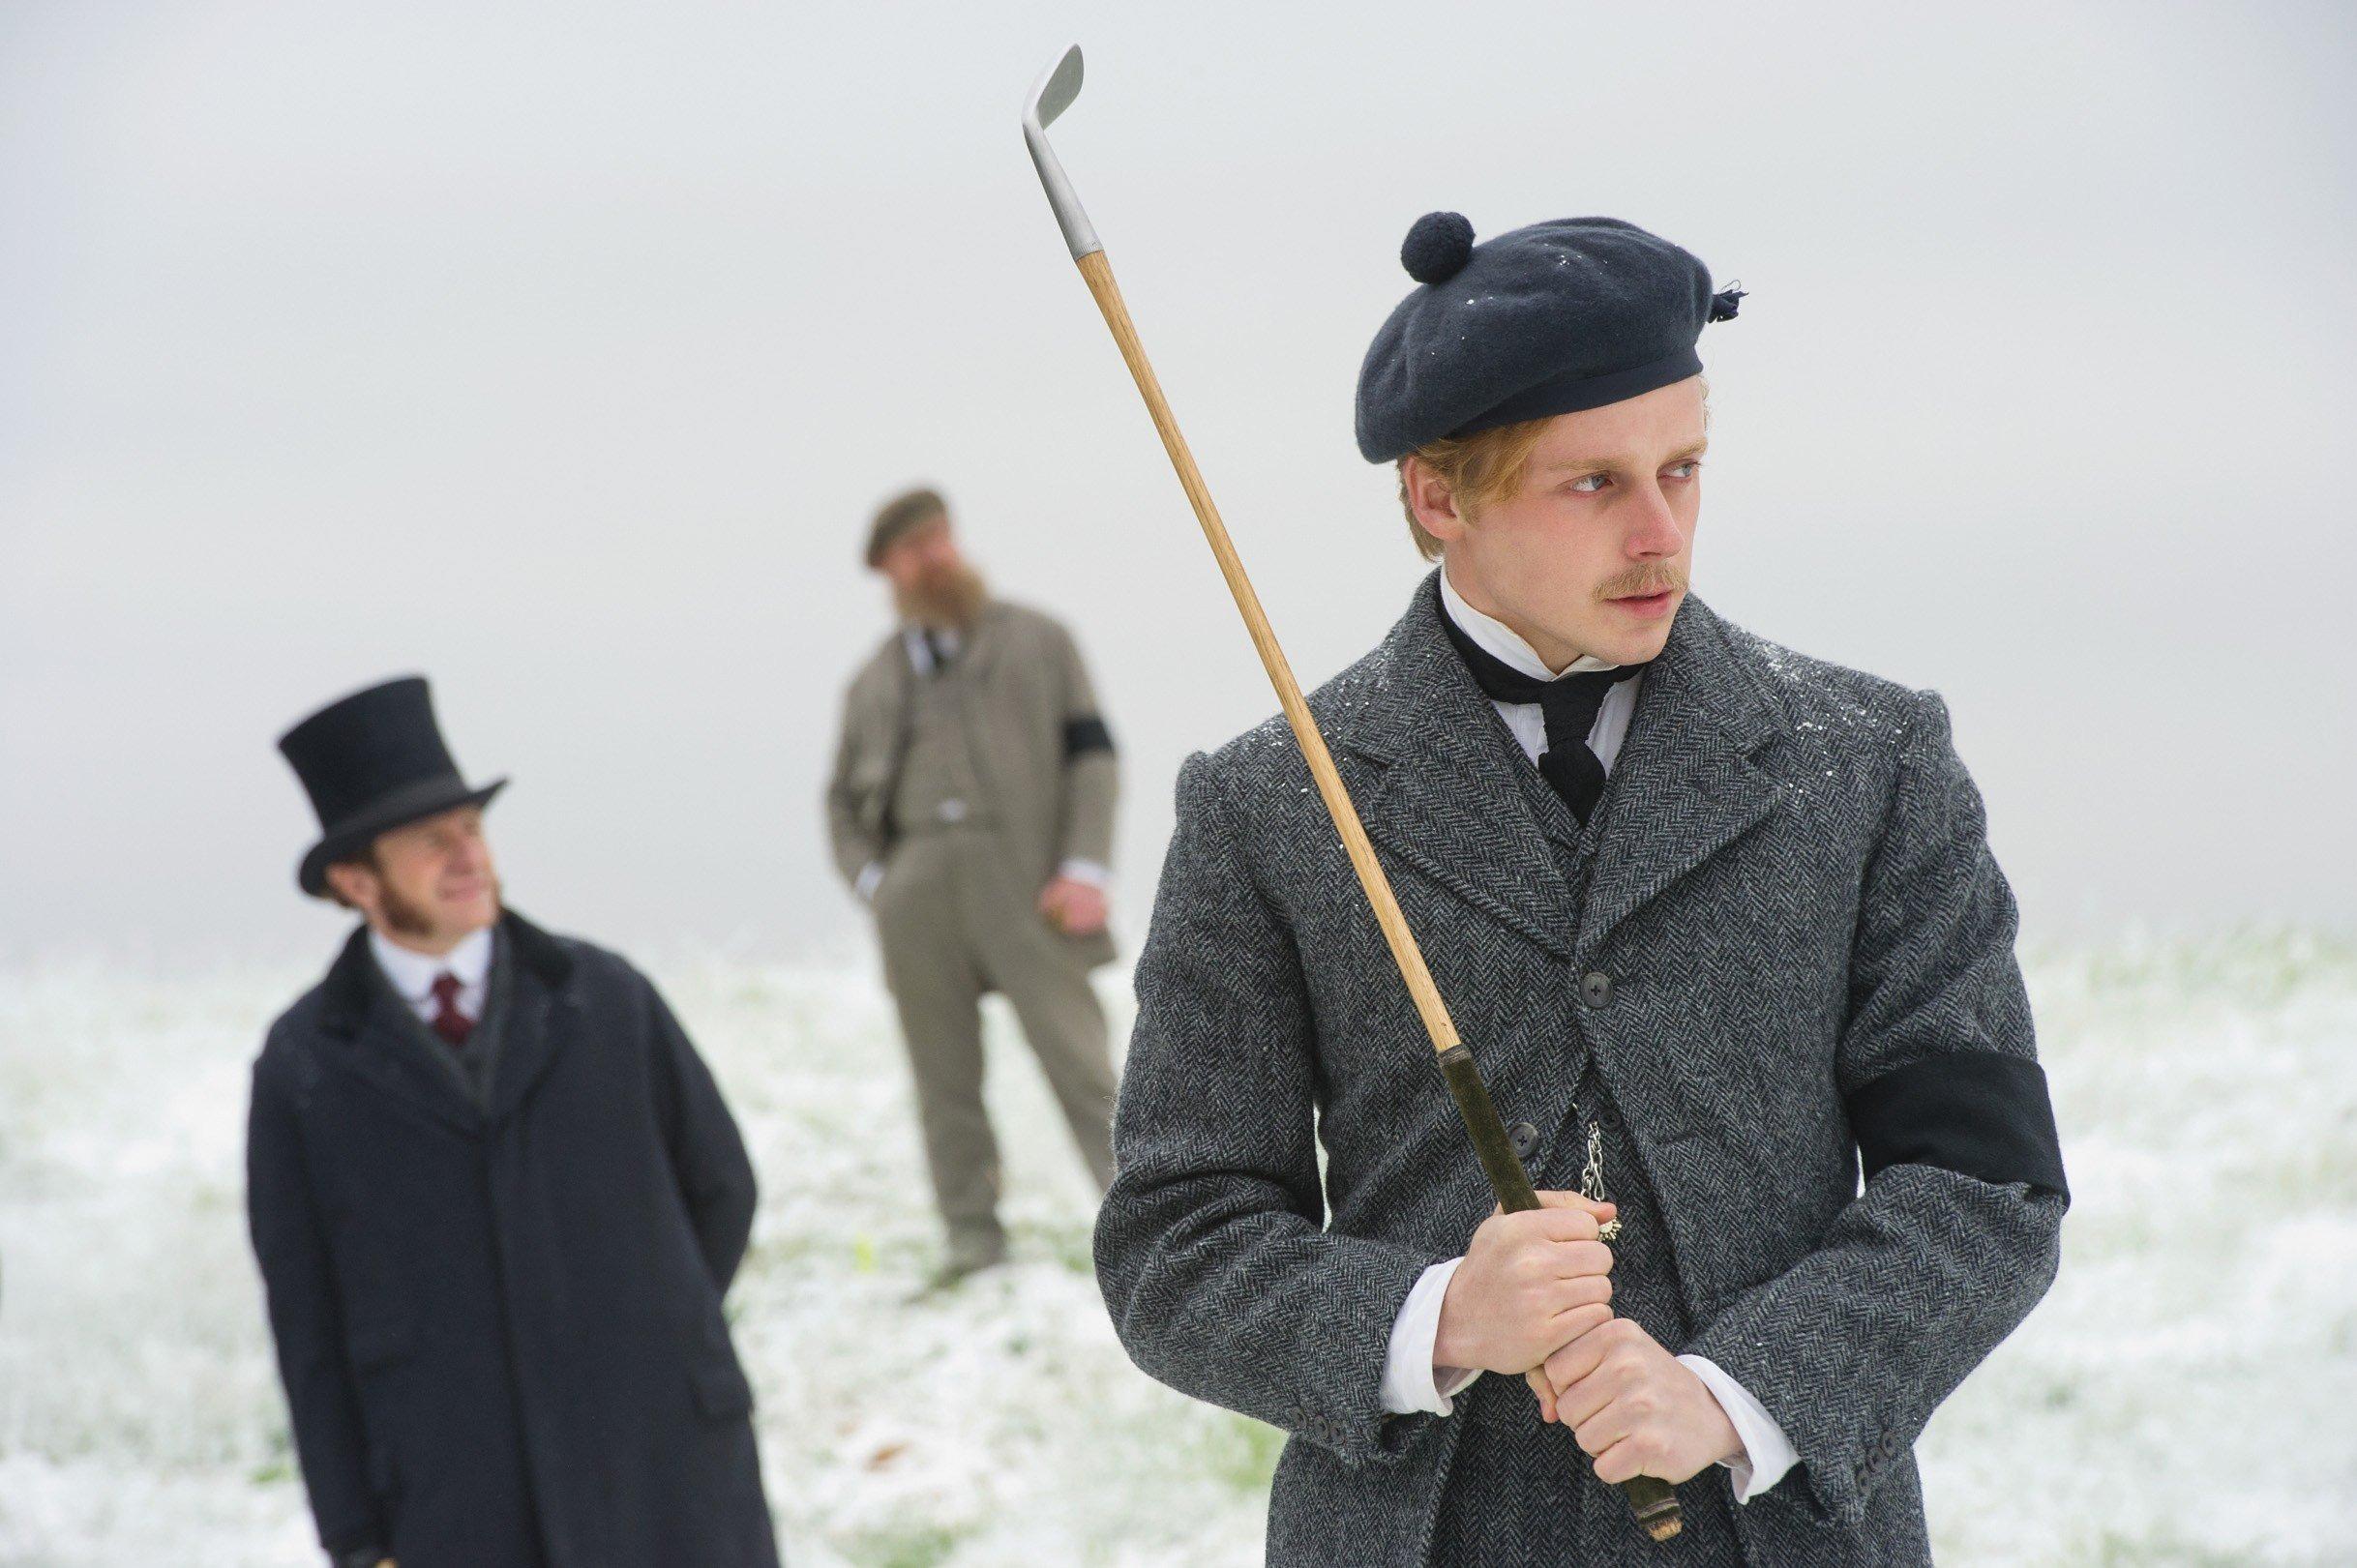 Jack Lowden in the period drama Tommy's Honour. Borderer Lowden stars alongside Peter Mullan in this 2016 golfing drama, directed by Jason Connery. Peebles was among more than 50 locations used by the movie’s makers during a six-week shoot.